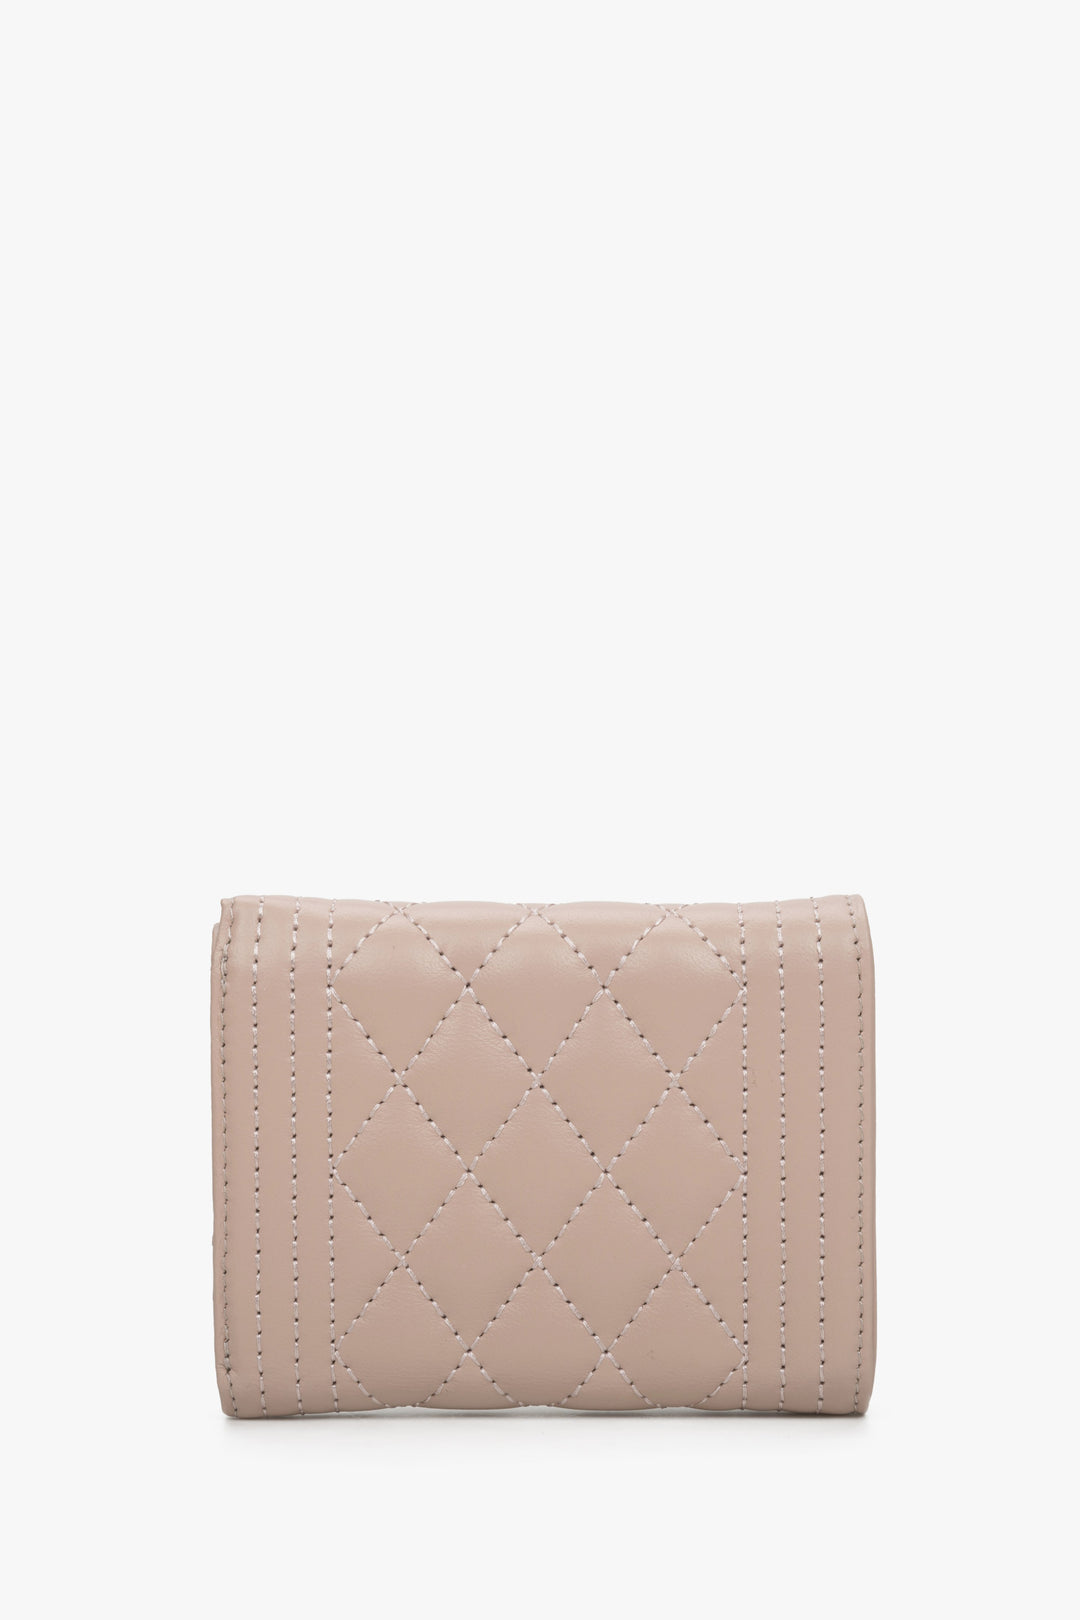 Women's small light pink wallet with embossing - back.